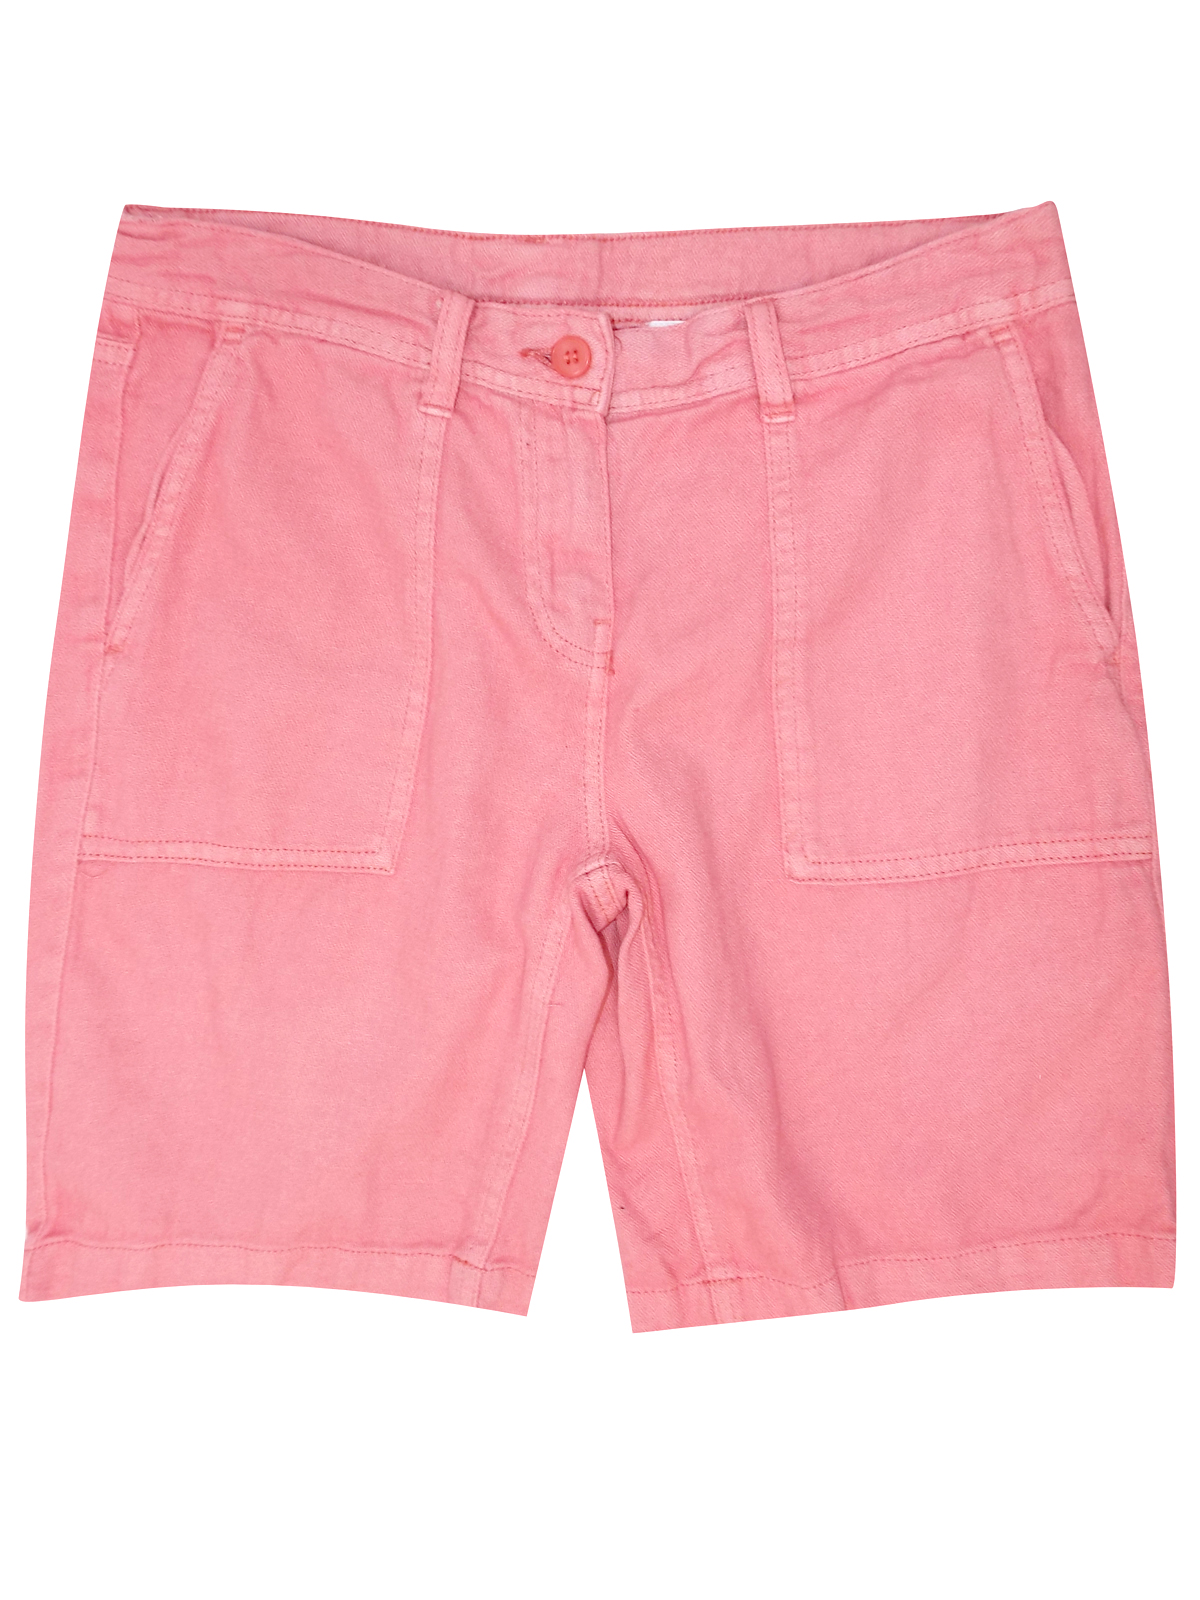 NEXT CORAL Linen Blend Shorts - Size 8 to 22